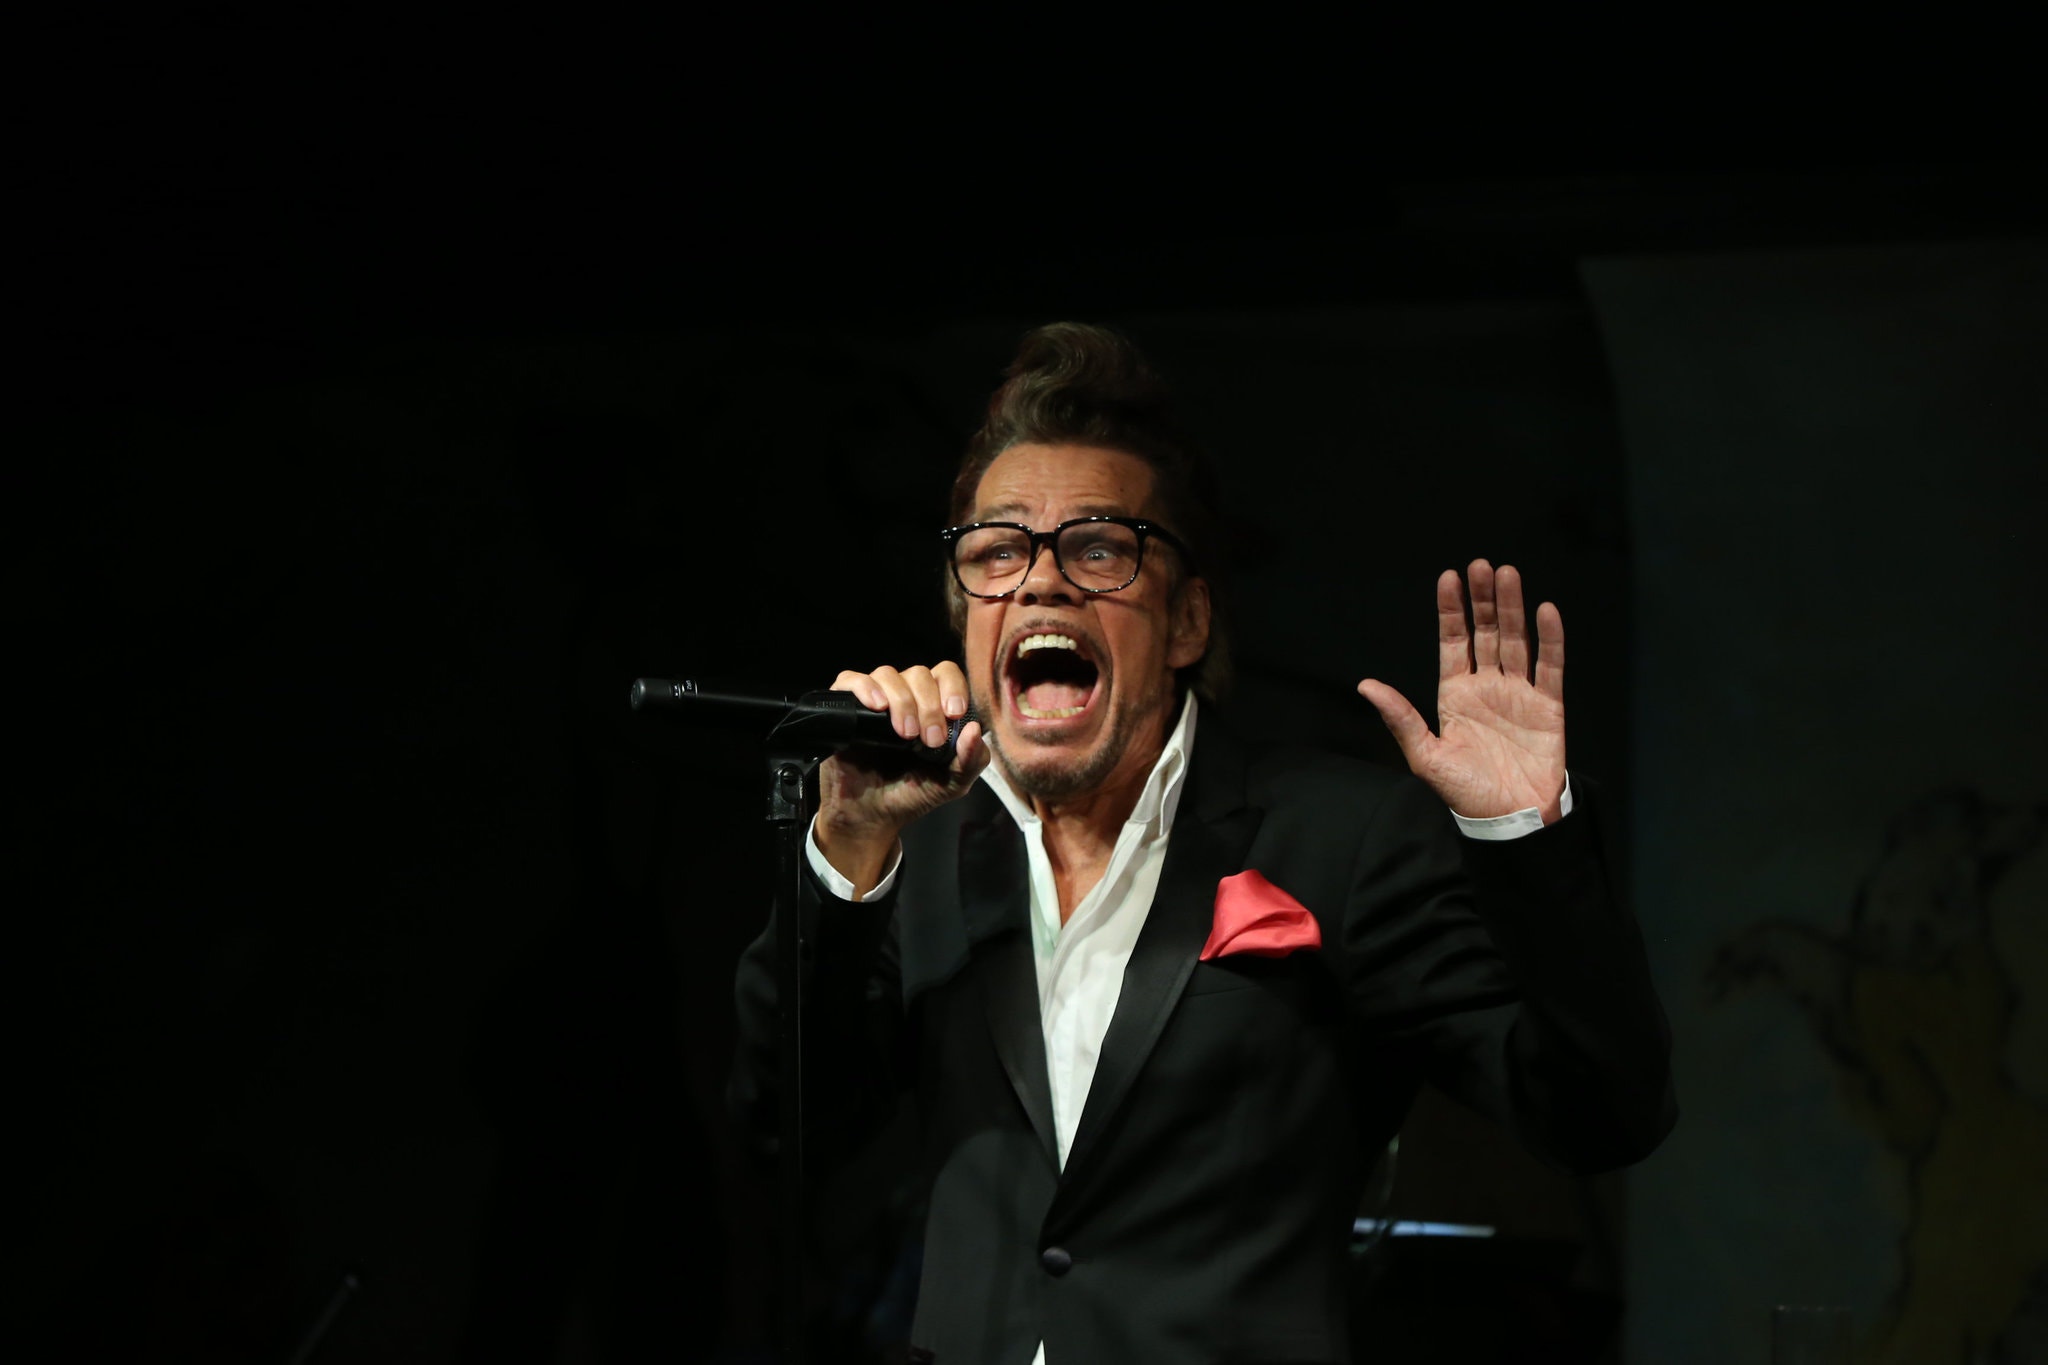 Review Buster Poindexter A Rocker Who Wants To Be Taken Lightly The